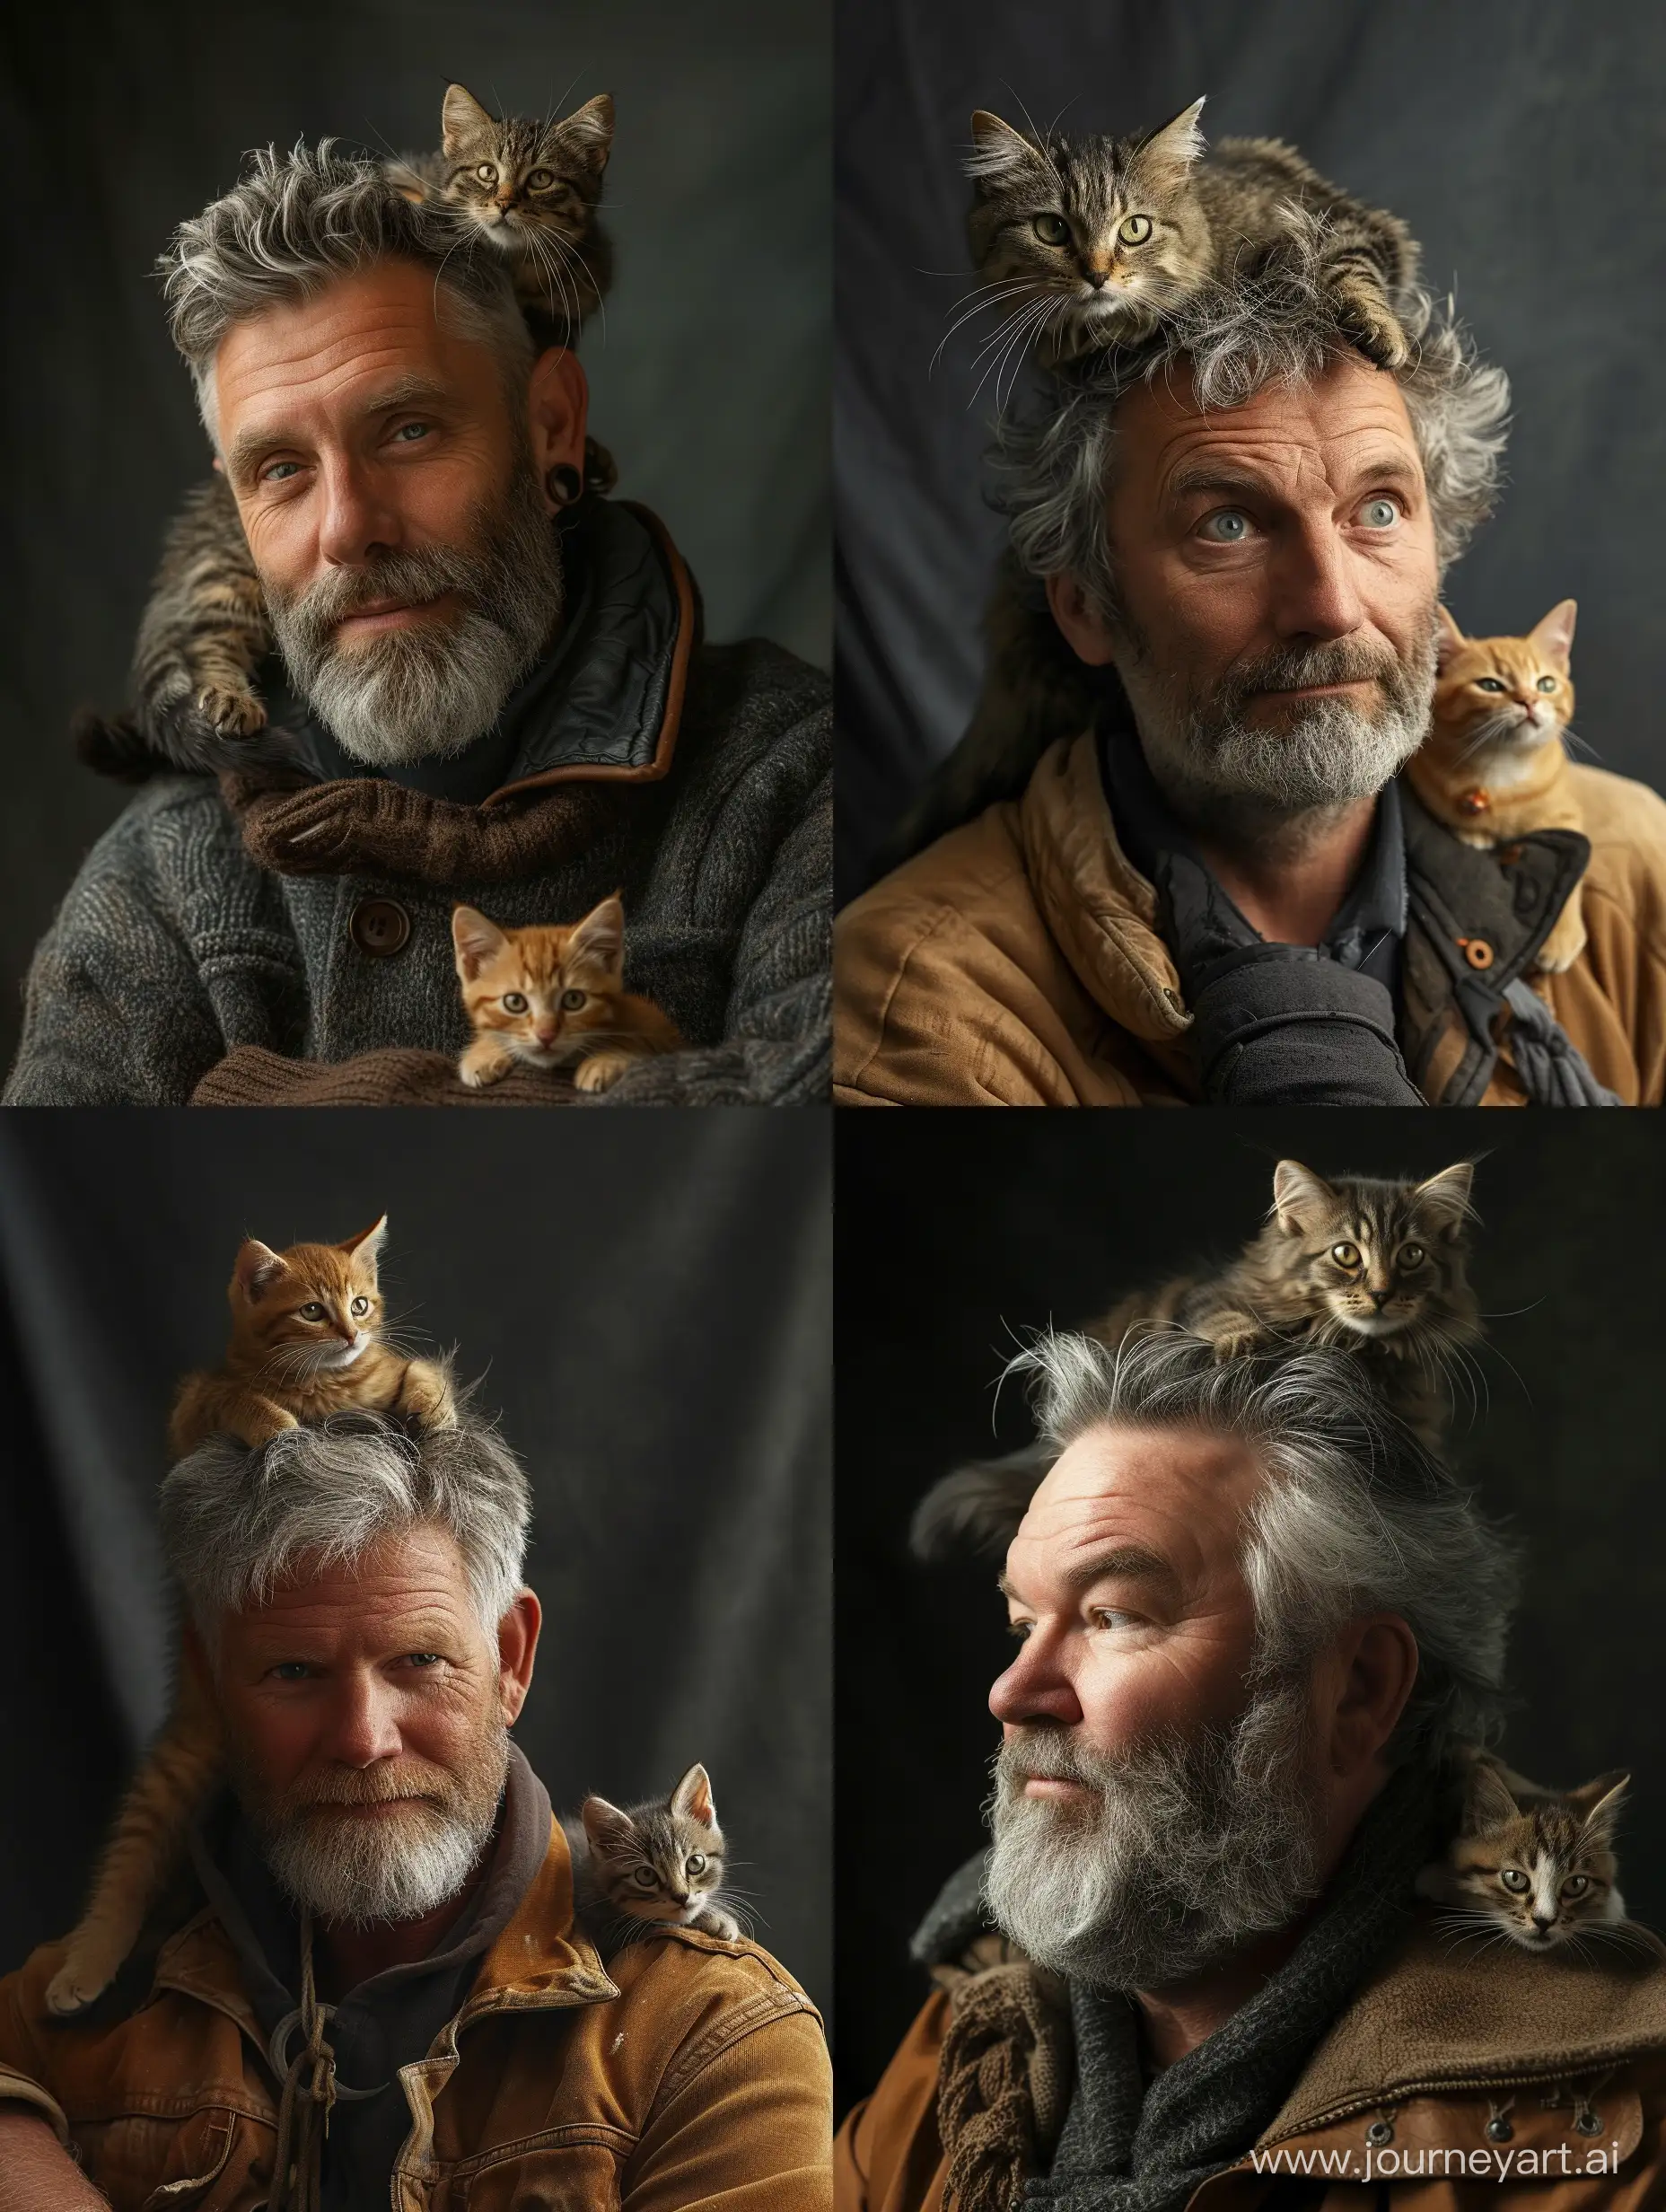 MiddleAged-Man-with-Cat-Photorealistic-Portrait-by-Alison-Geissler